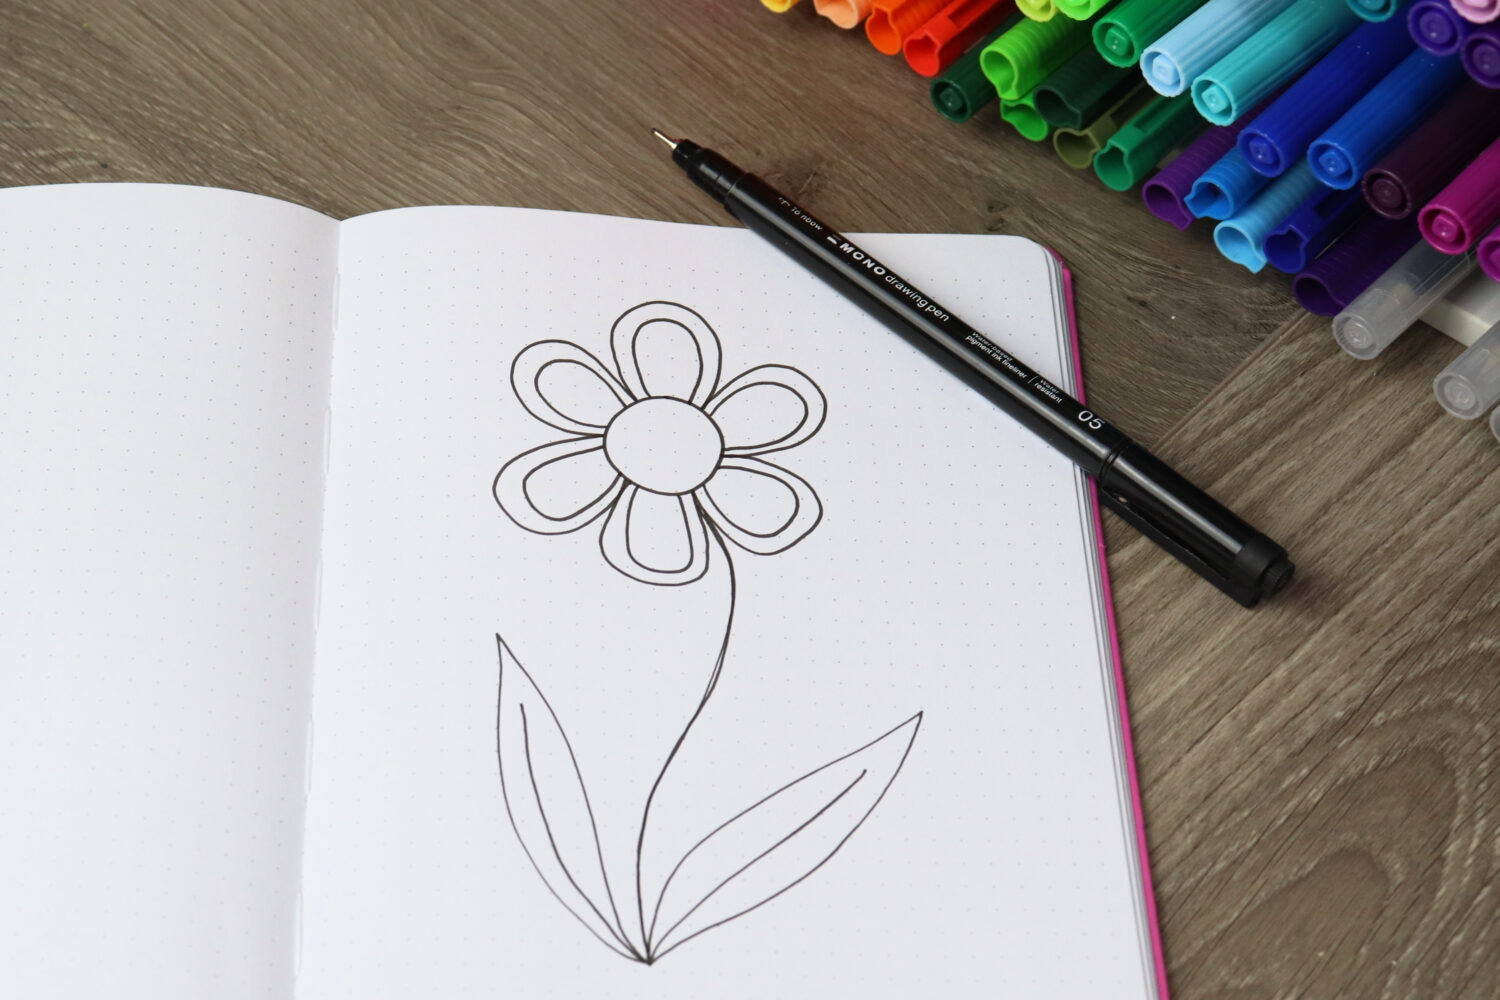 Image contains an open sketchbook next to a container of colored markers on a wooden desk. A large flower is doodled on the page, and a MONO Drawing Pen 05 sits on top.